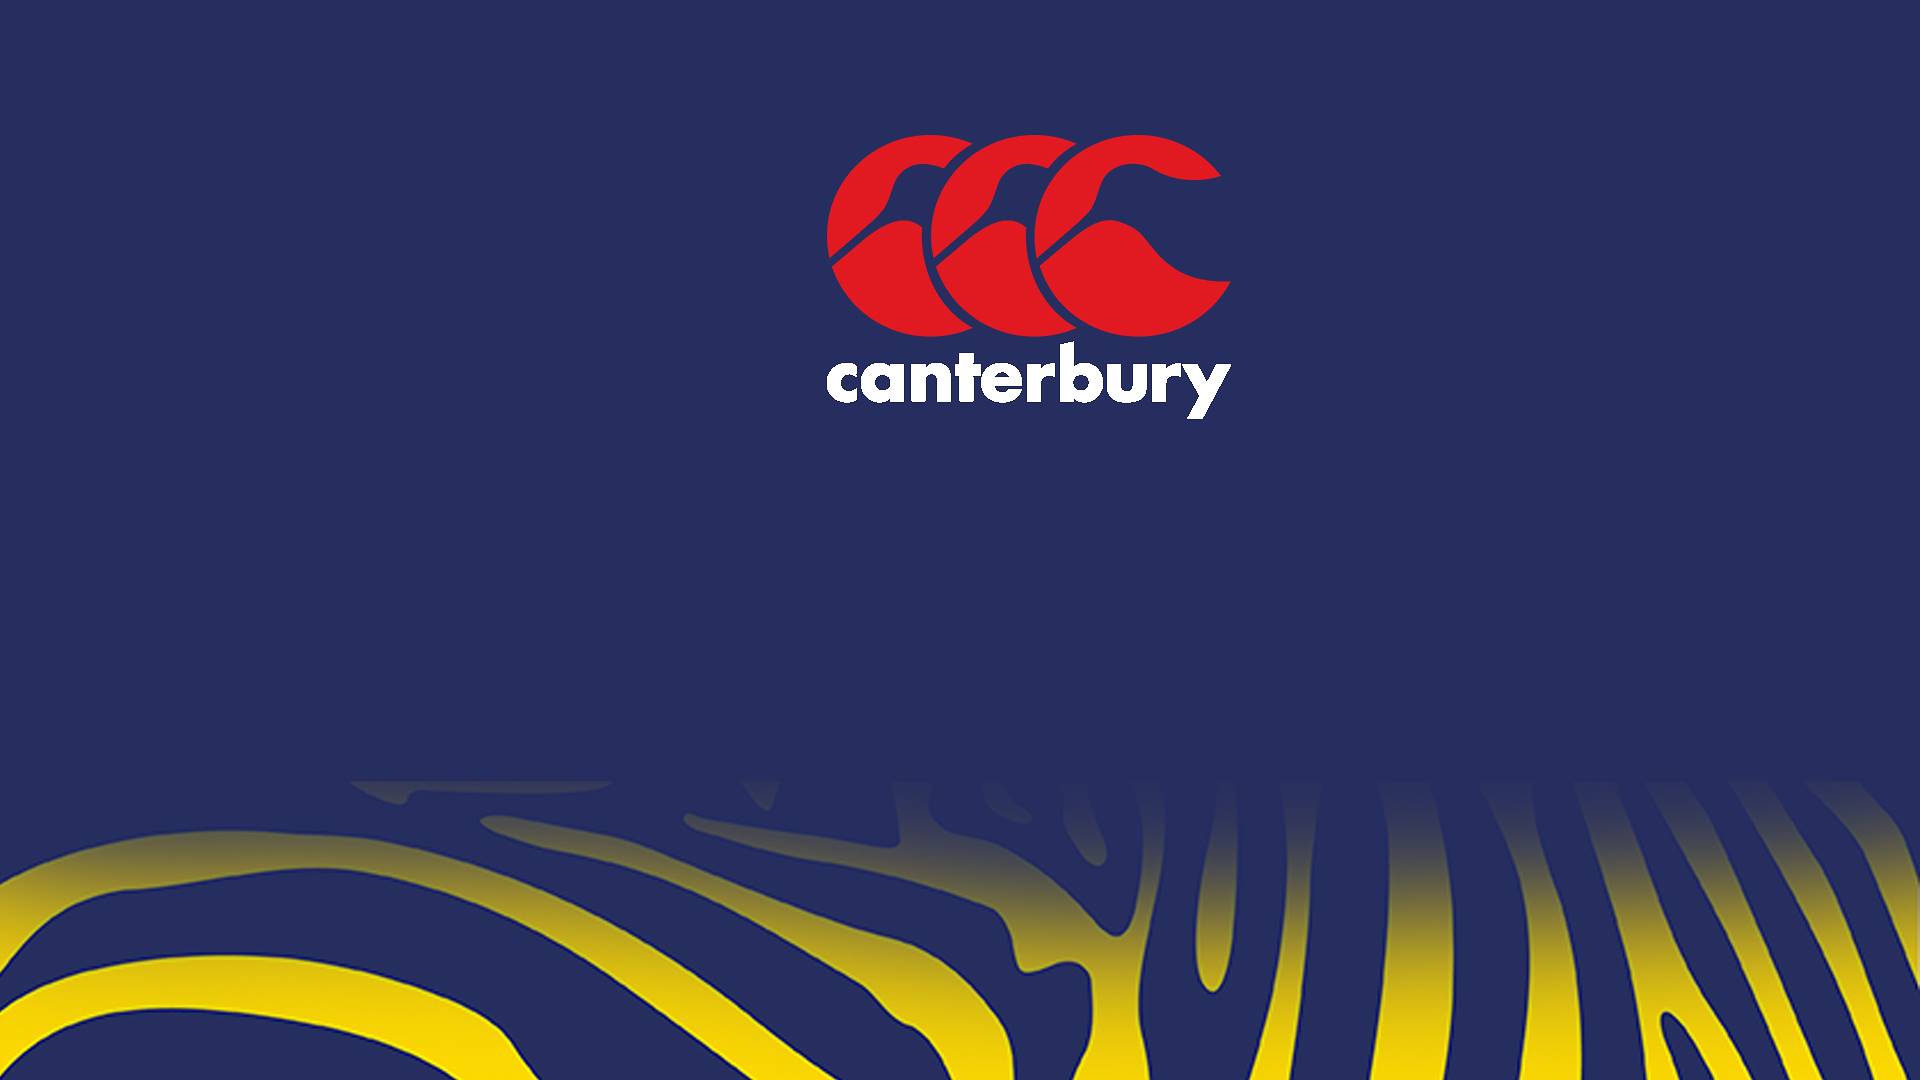 CANTERBURY IS THE NEW TECHNICAL SPONSOR OF ZEBRE PARMA